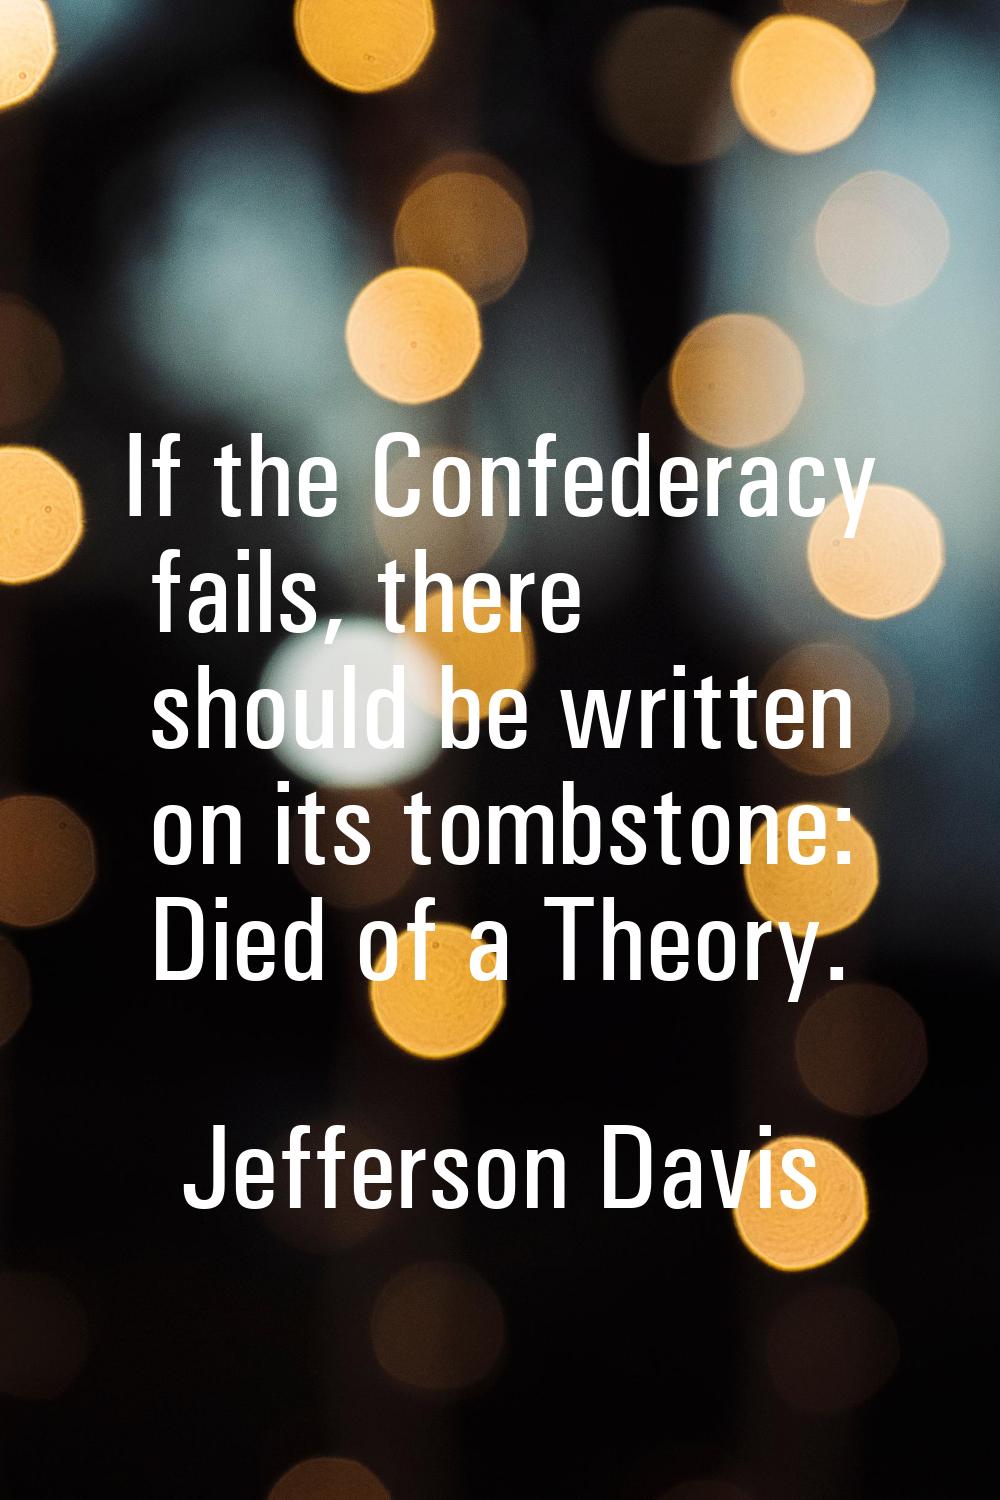 If the Confederacy fails, there should be written on its tombstone: Died of a Theory.